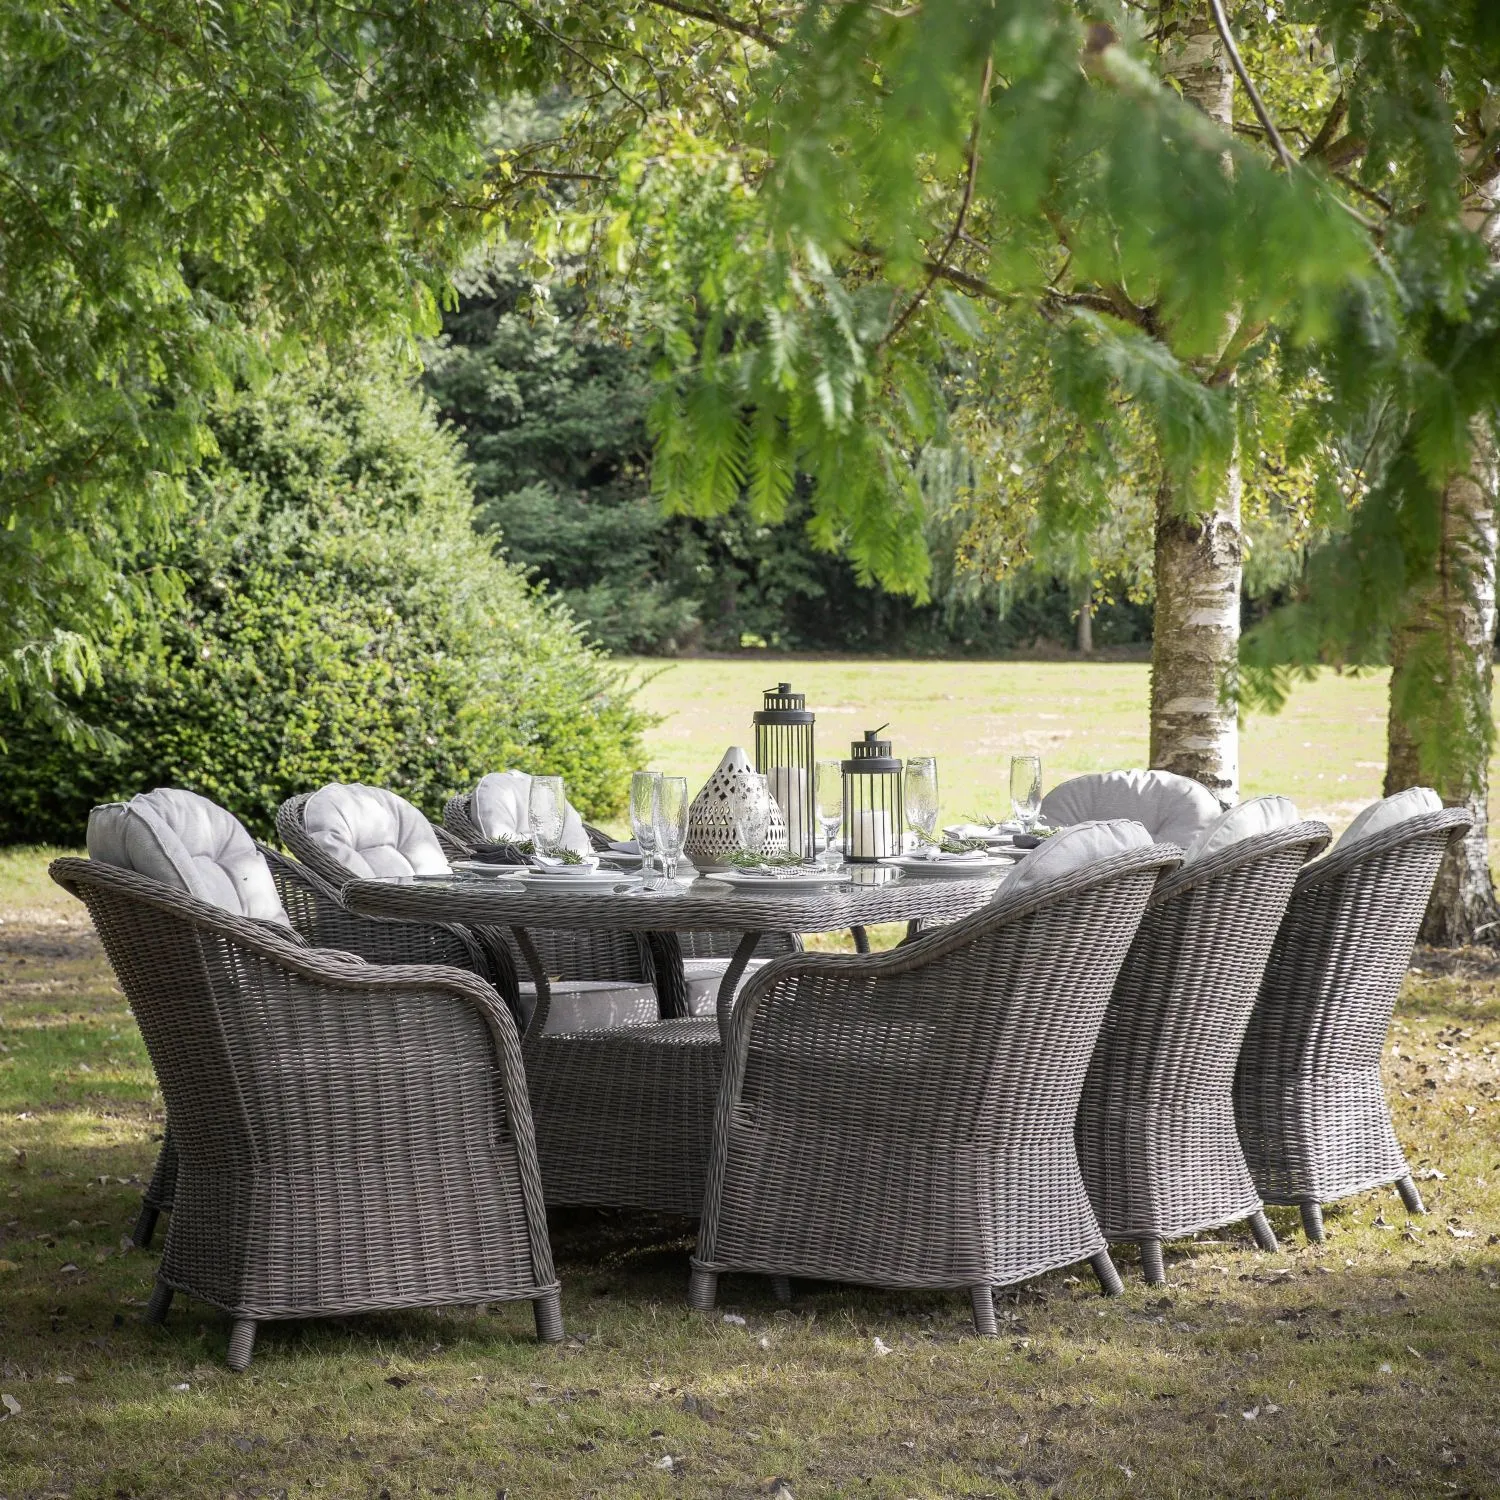 Grey Rattan Oval Garden Dining Table and 8 Chair Set with Cushions